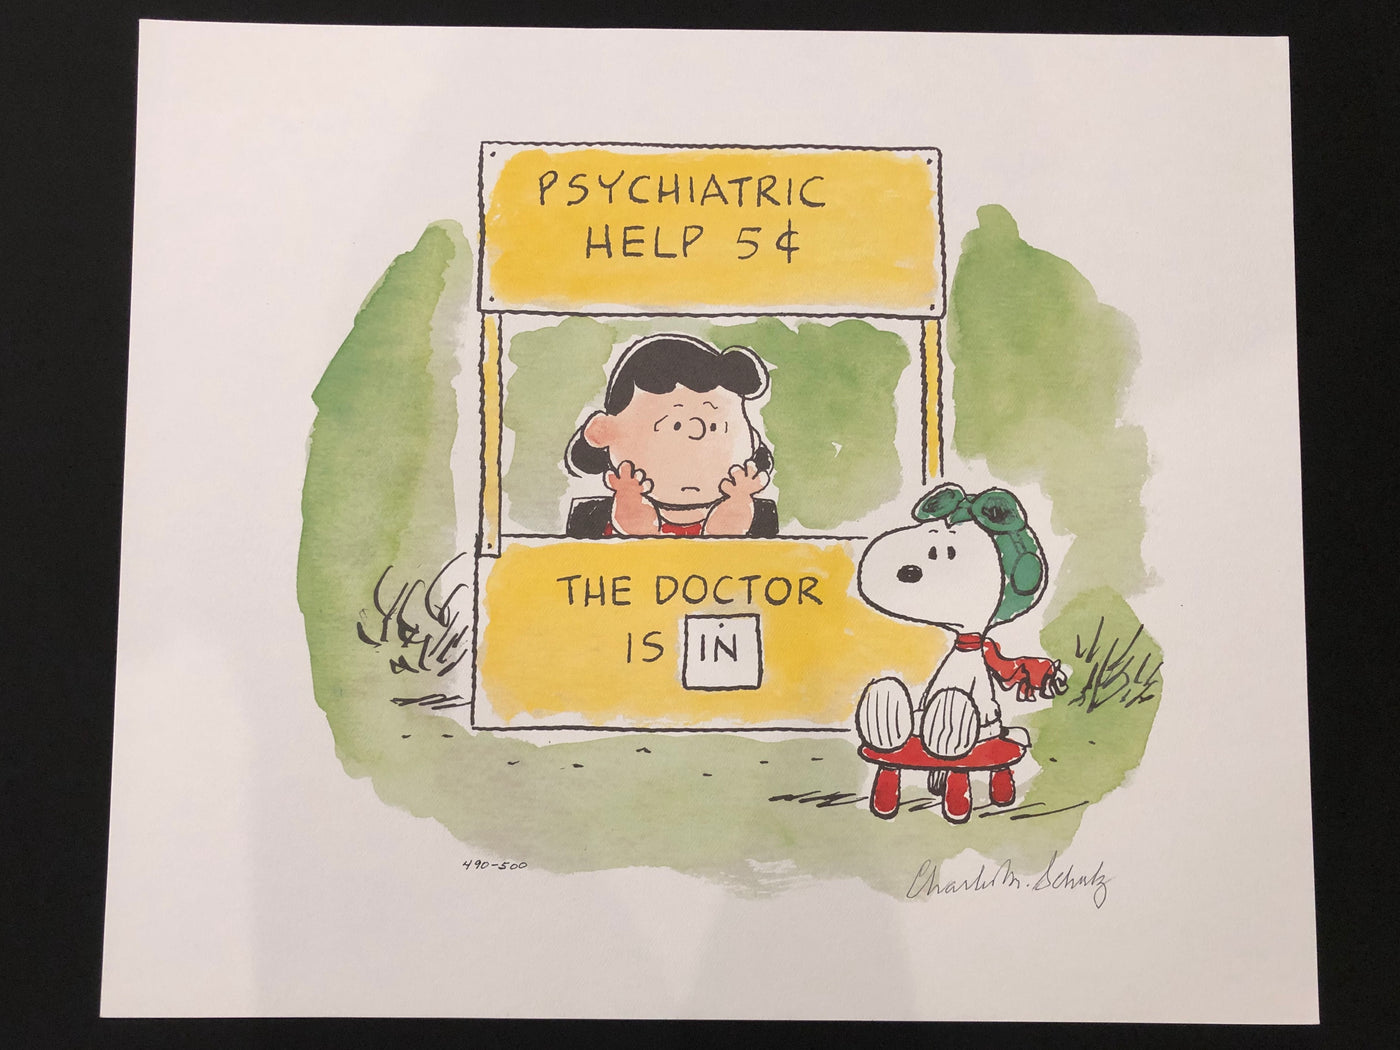 Charles Schulz Signed Lithograph, Five Cents, Please